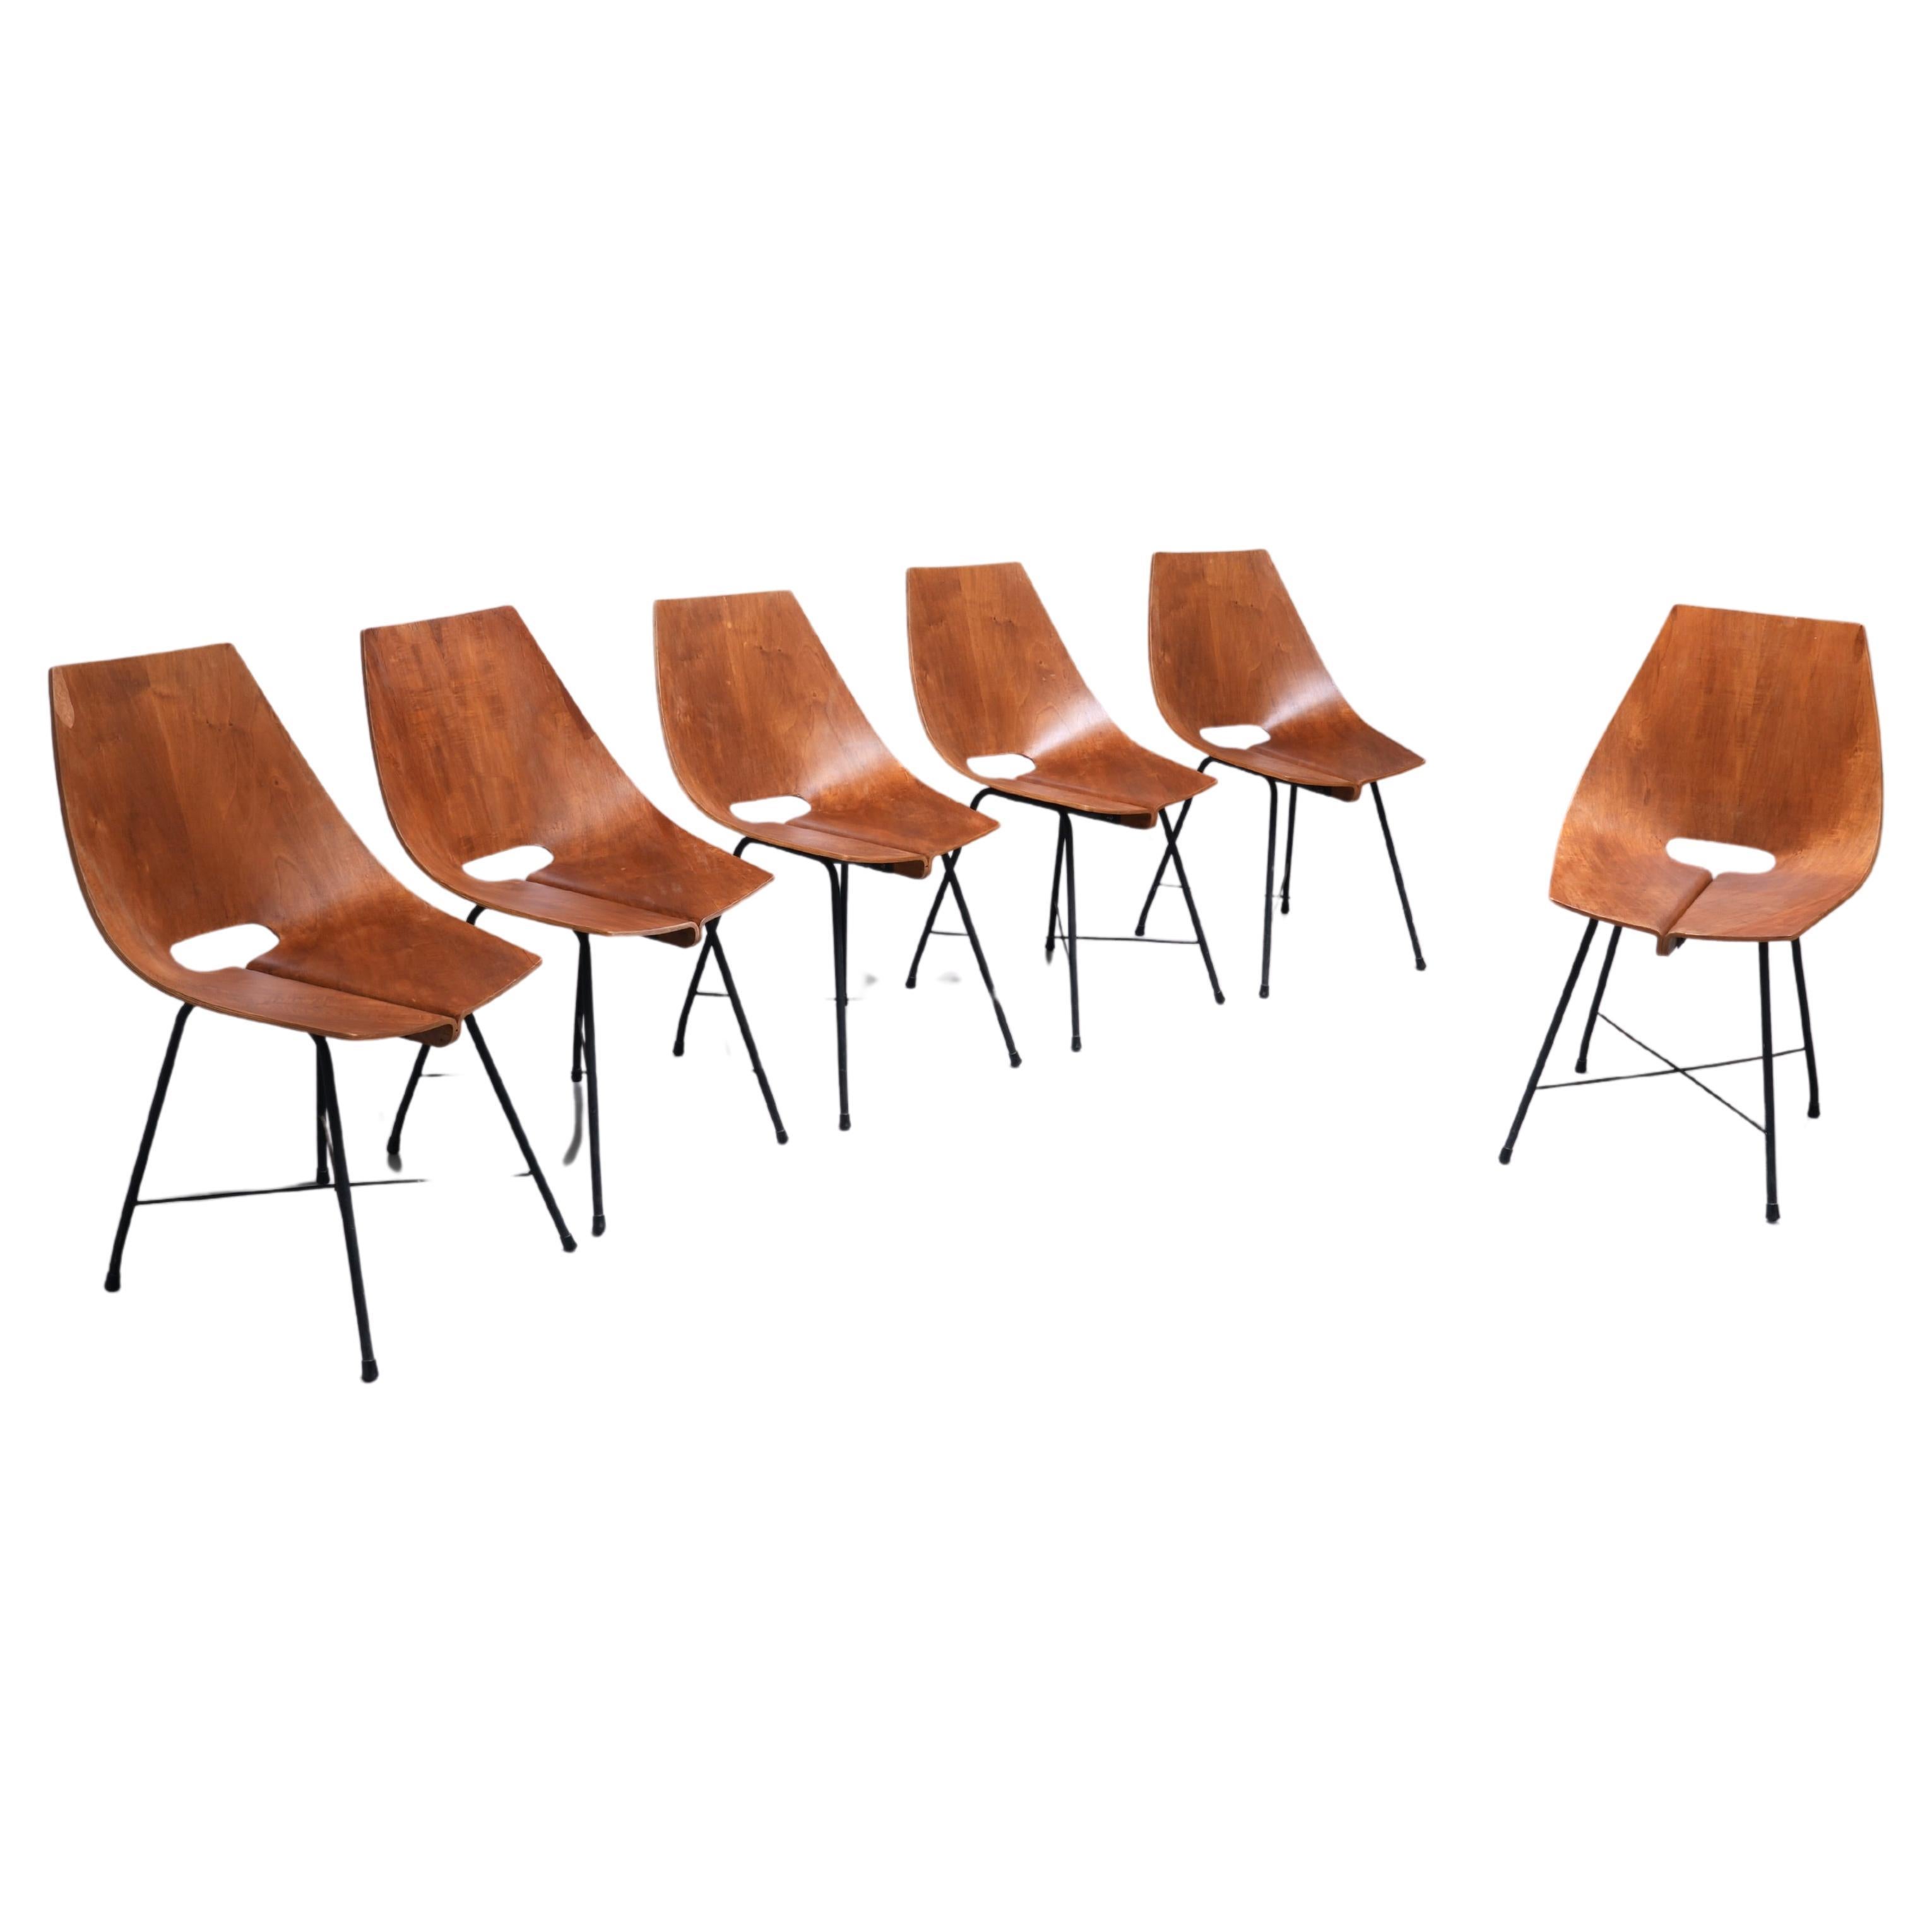 Set of 6 Dining Room Chairs by Carlo Ratti in Plywood and Metal, Italy, 1954